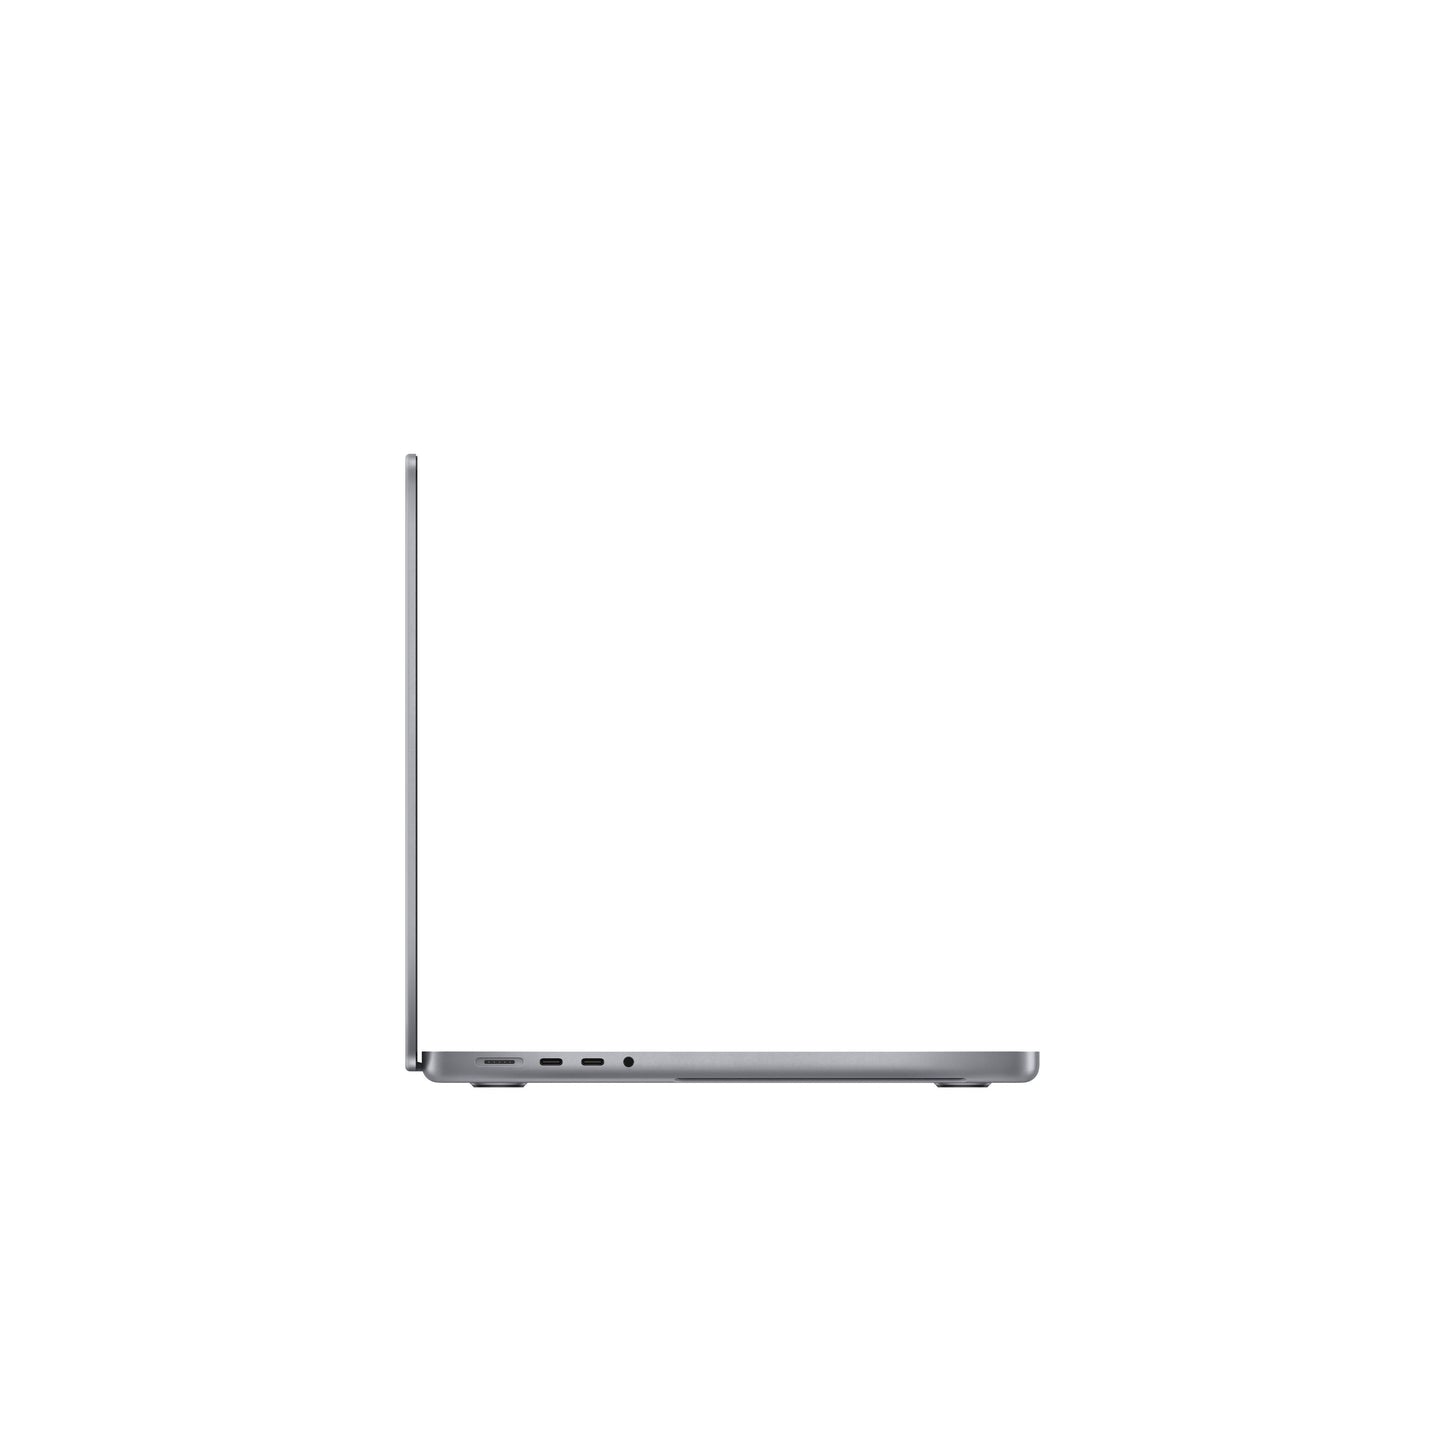 14-inch MacBook Pro: Apple M1 Pro chip with 8?core CPU and 14?core GPU, 512GB SSD - Space Grey